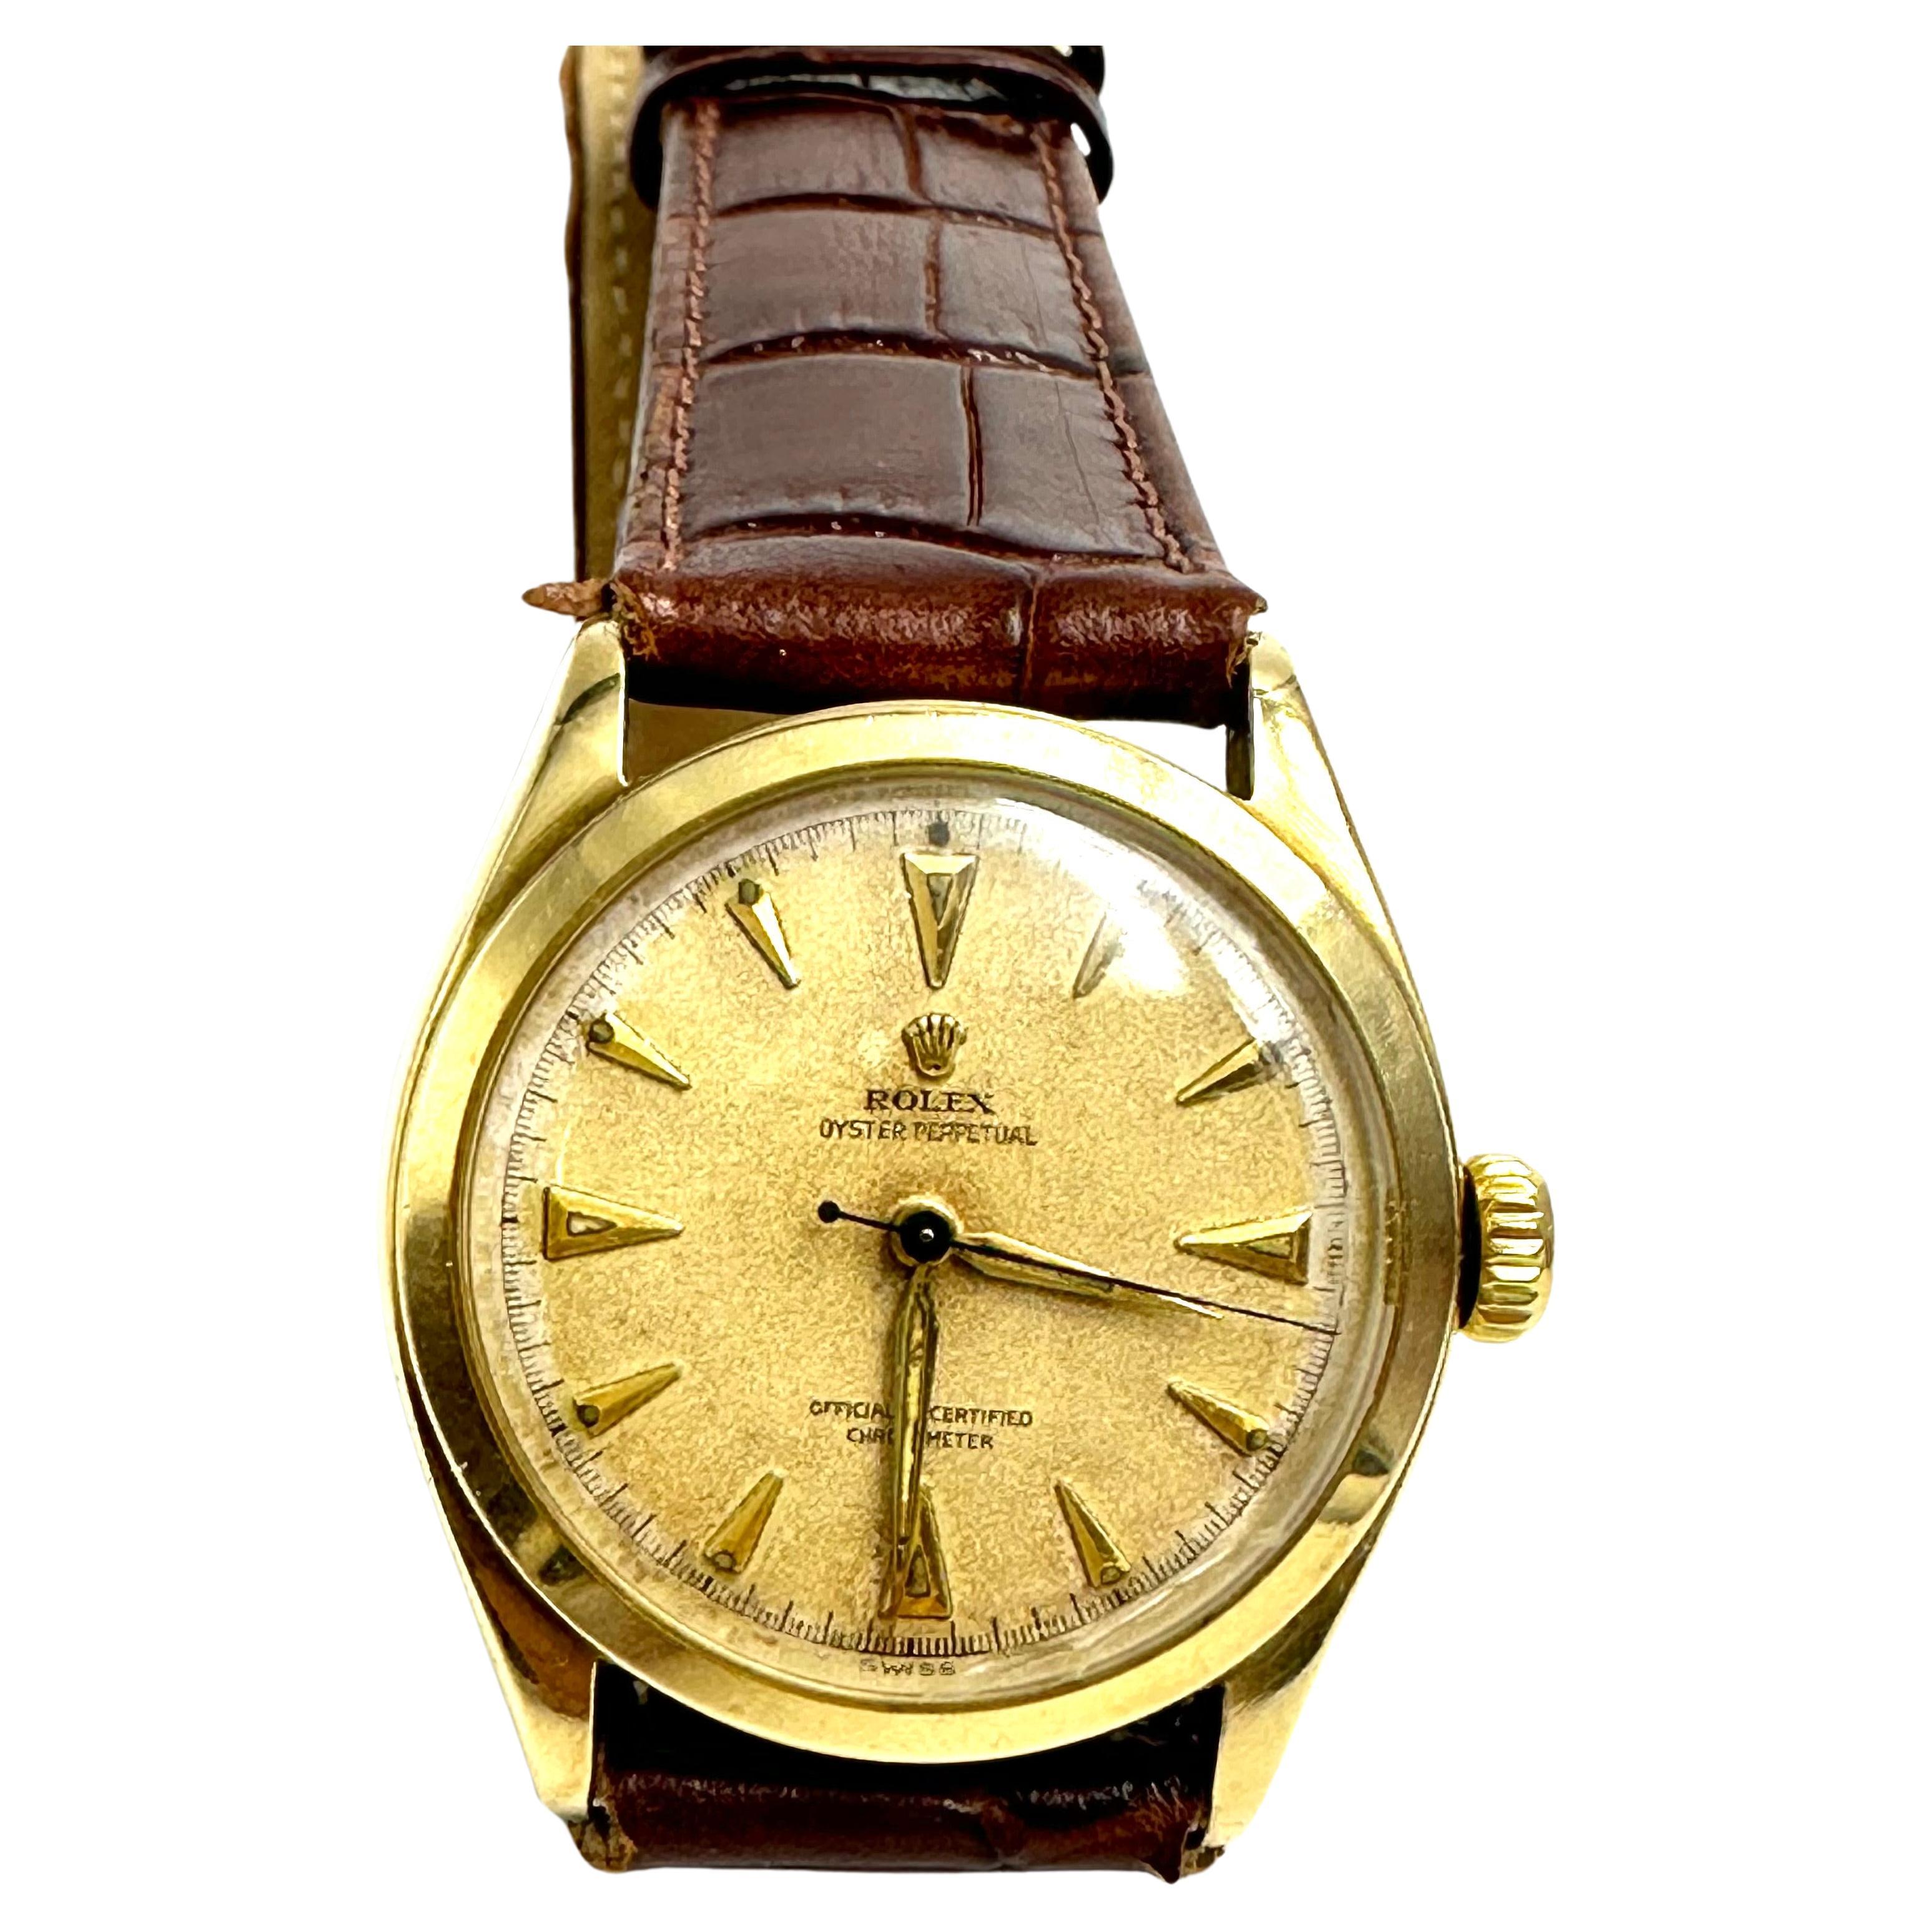 Rolex Oyster Perpetual, Ref 6084, 14K gold case